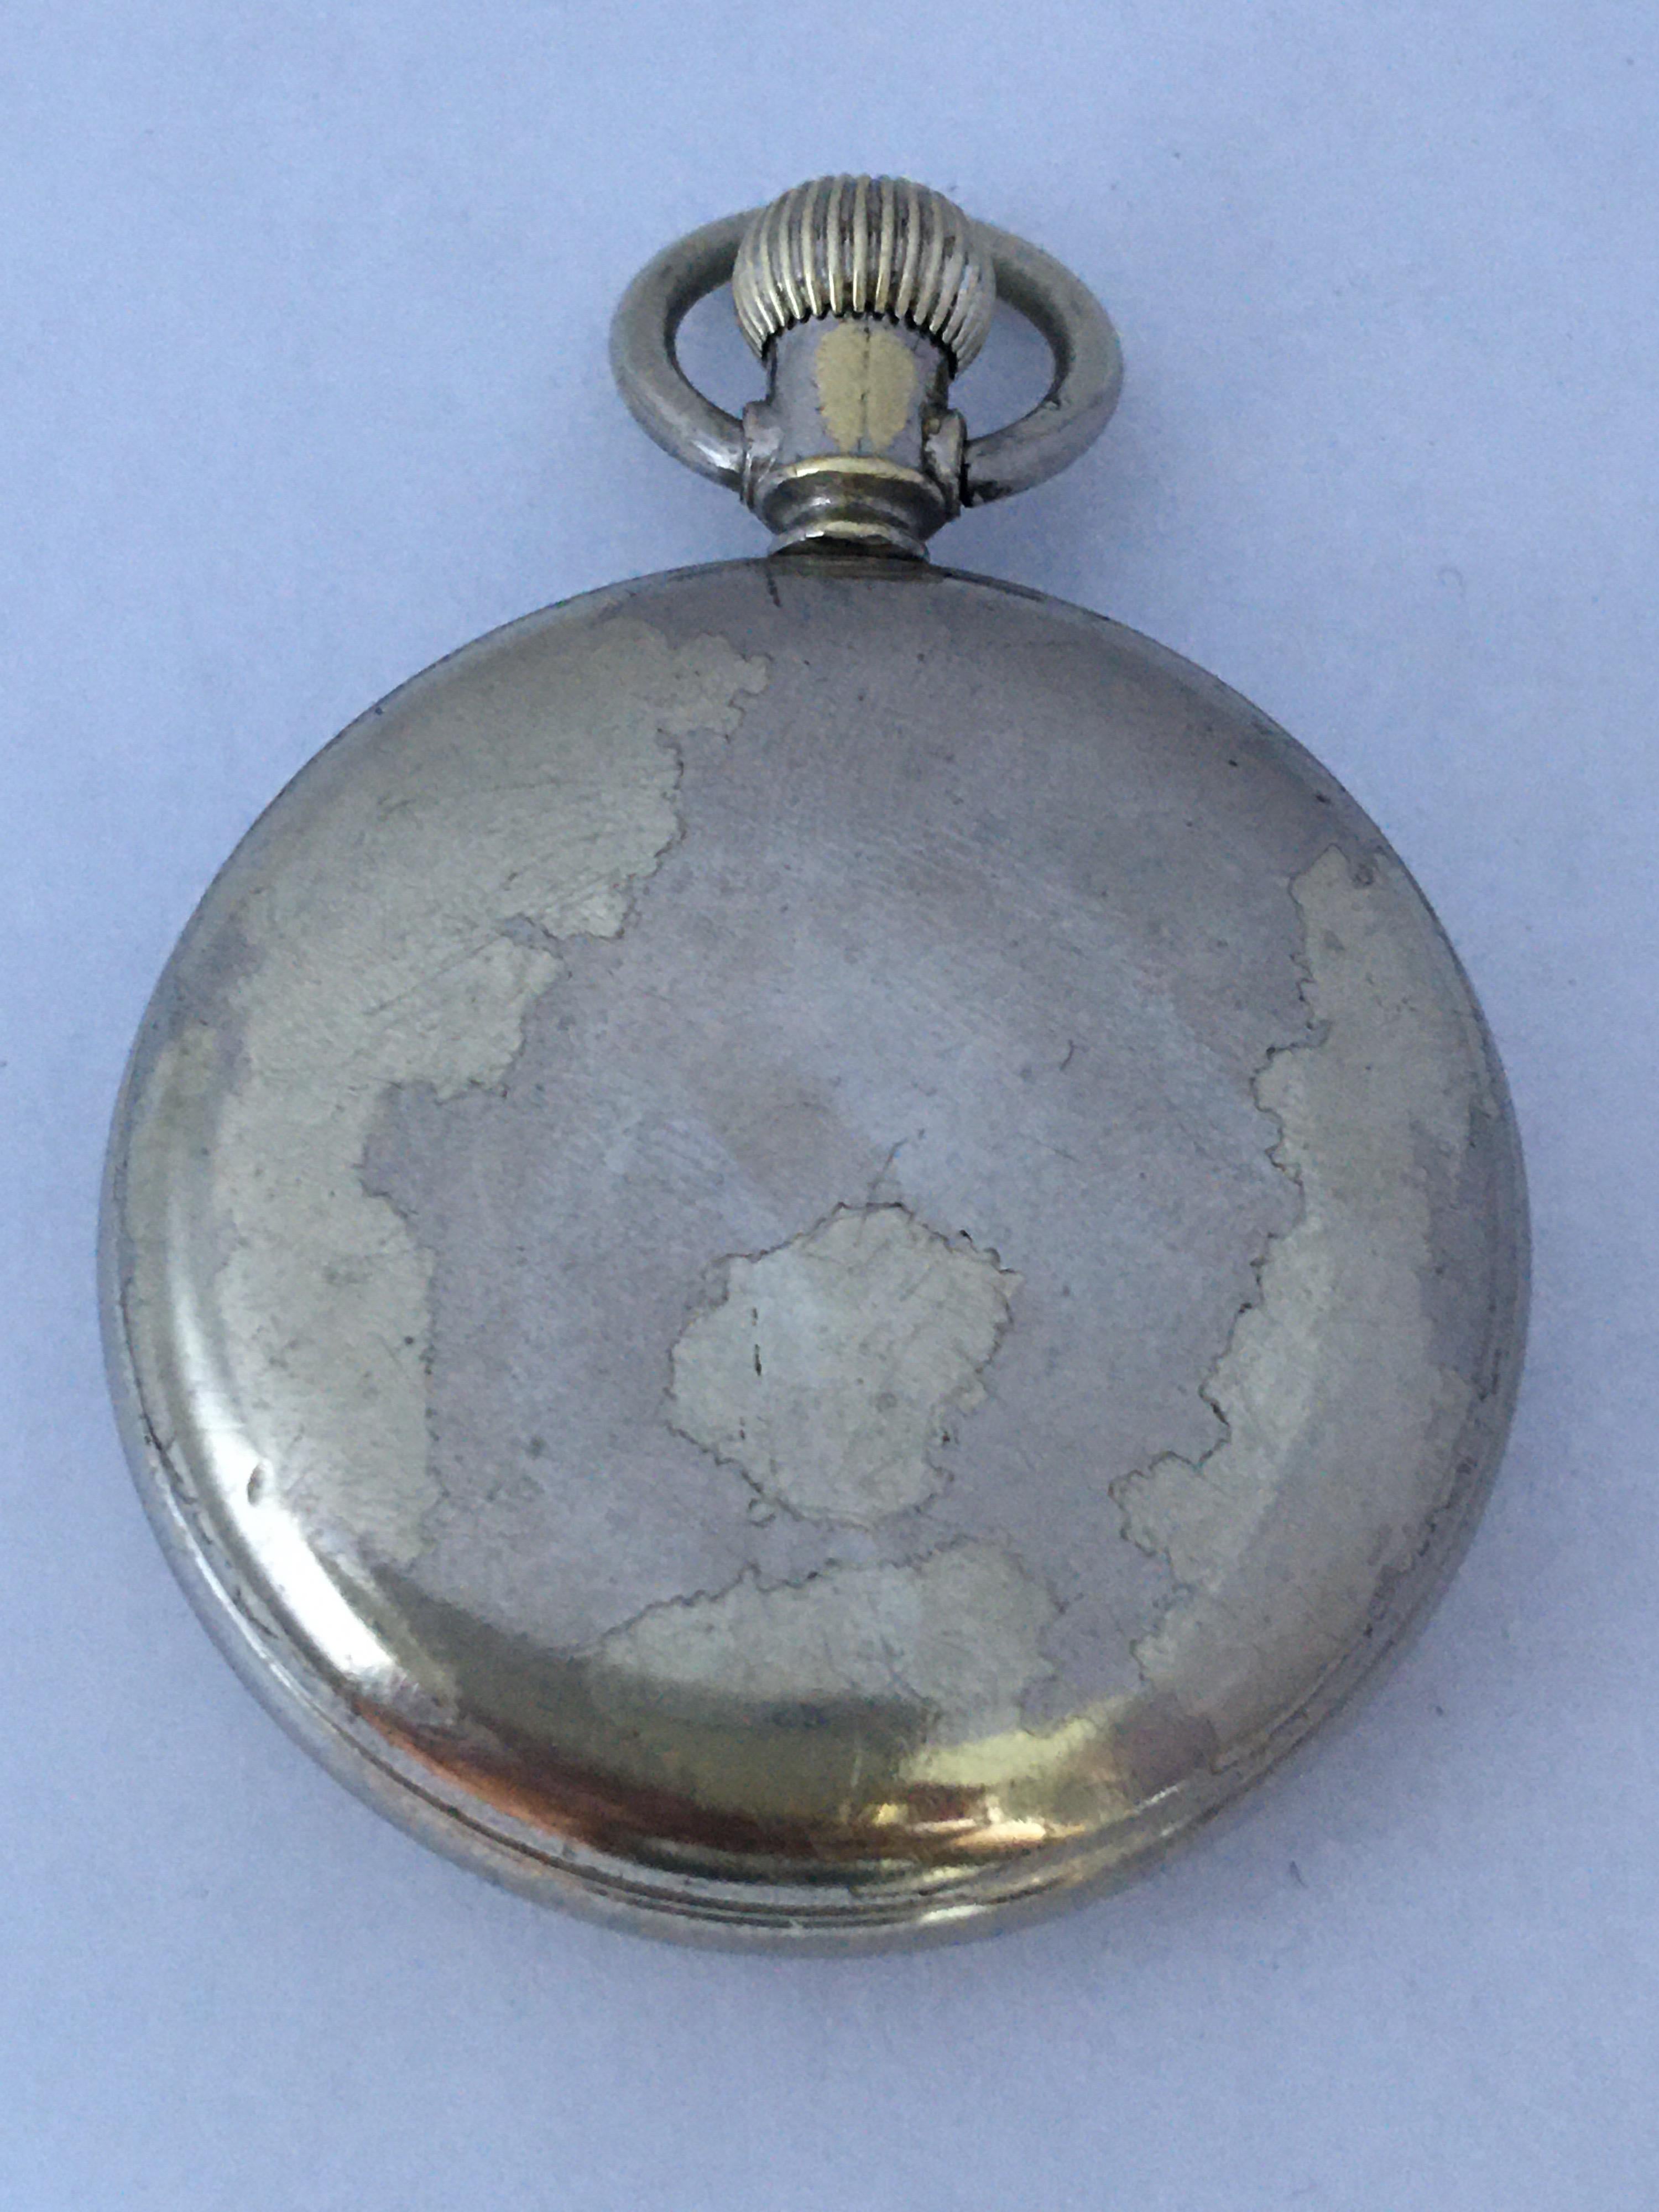 This beautiful 42mm diameter hand winding pocket watch is in good working condition and it is ticking nicely. It is recently been serviced.  Visible signs of ageing and wear with light marks on the glass surface and on the watch case as shown. The